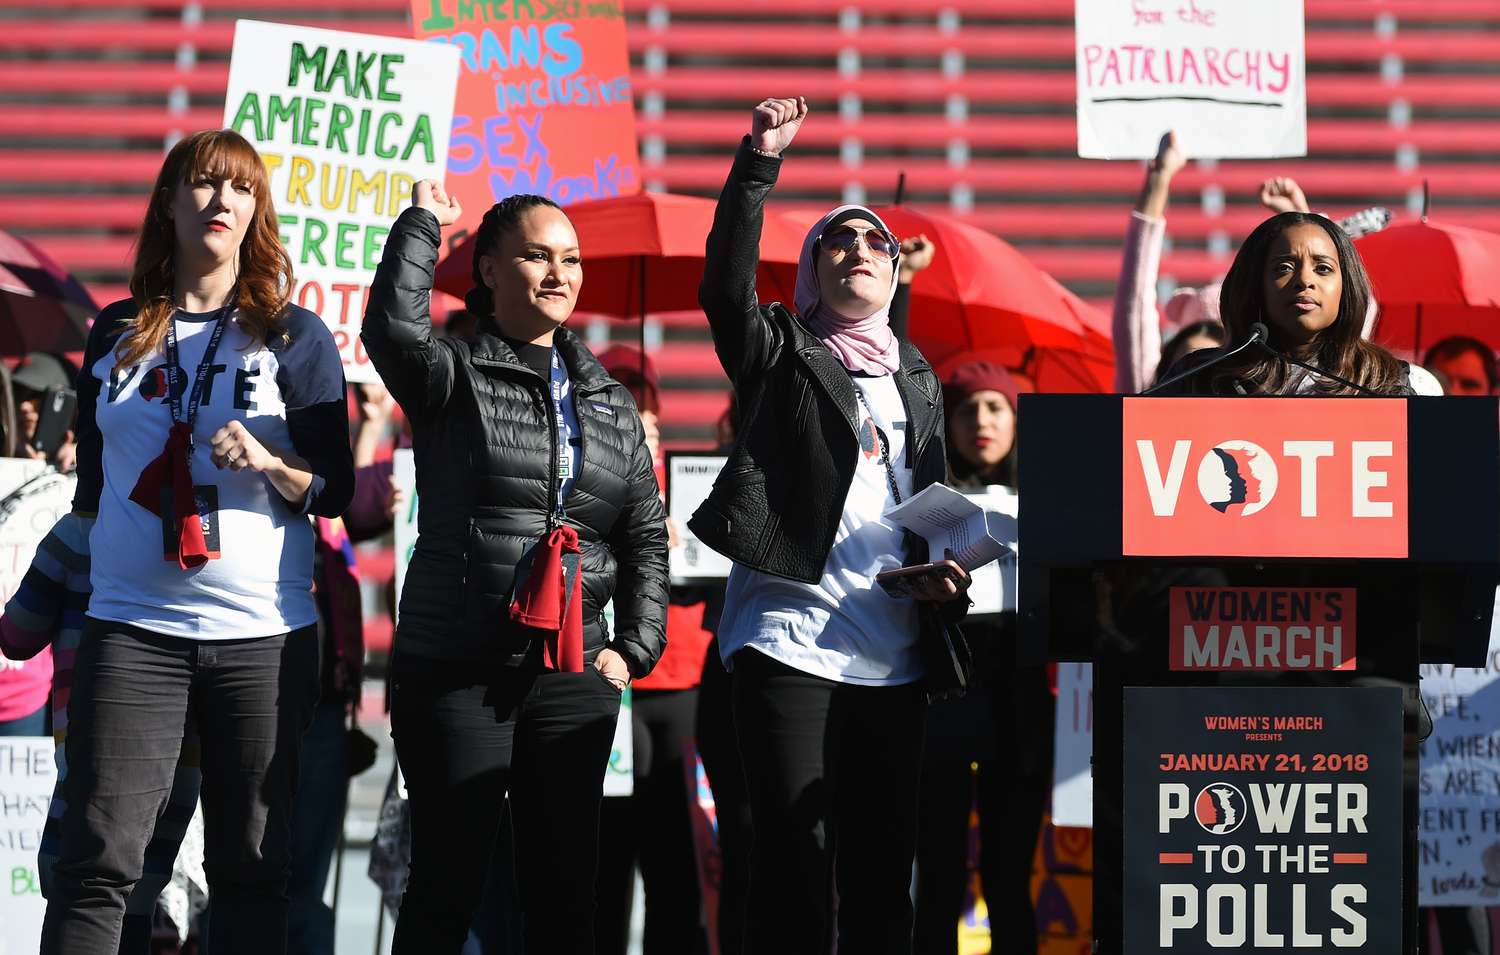 "Power To The Polls" Voter Registration Tour Launched In Las Vegas On Anniversary Of Women's March